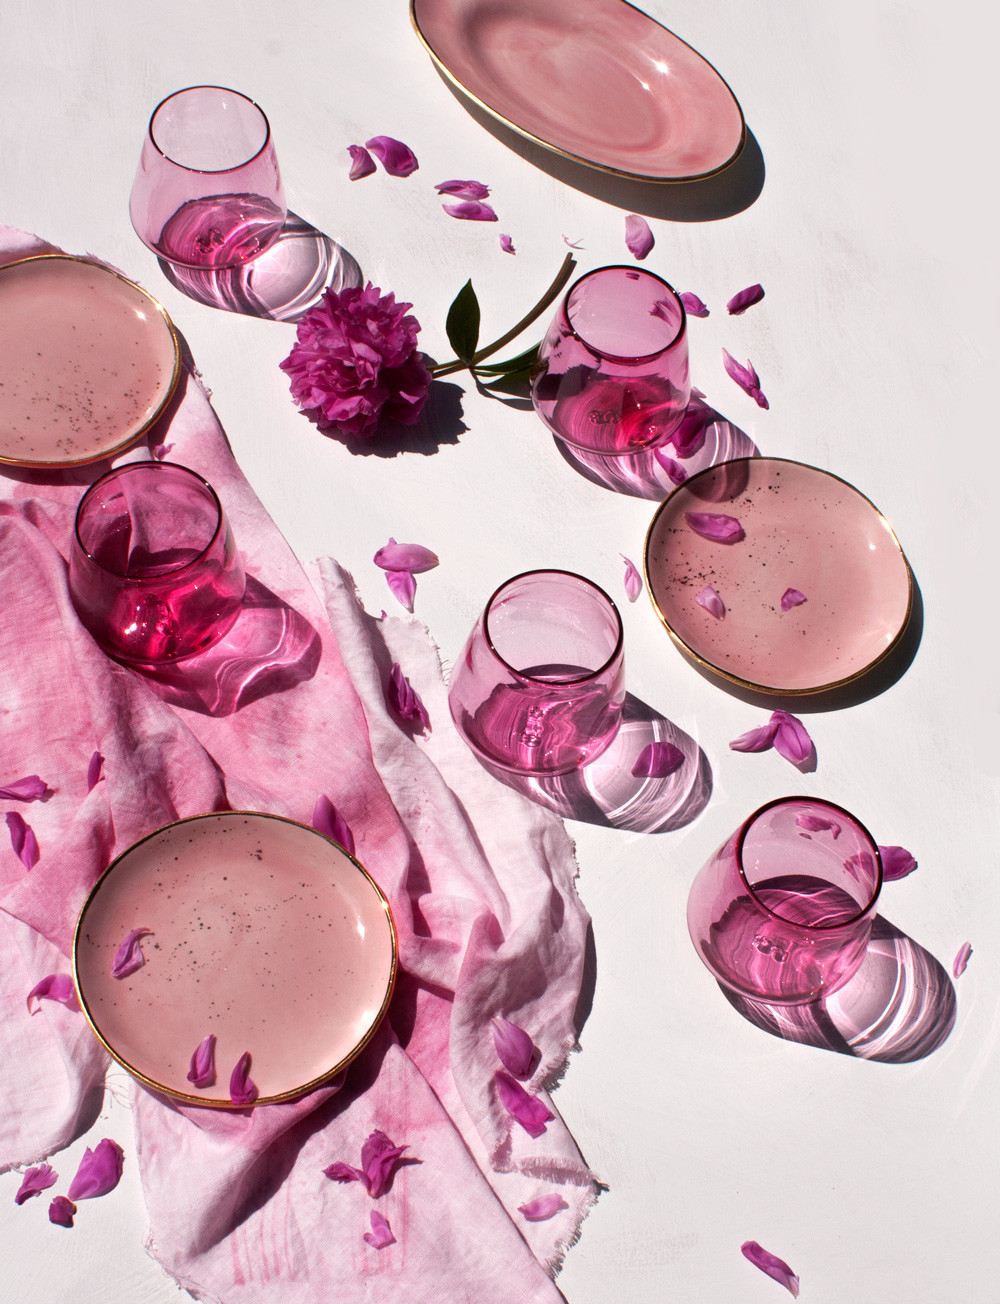 suite-one-studio-peony-pink-glassware-with-peony-petals-and-oval-platter-in-rose-with-gold-and-dessert-plates-in-rose-with-gold-splatter-vertical.jpg